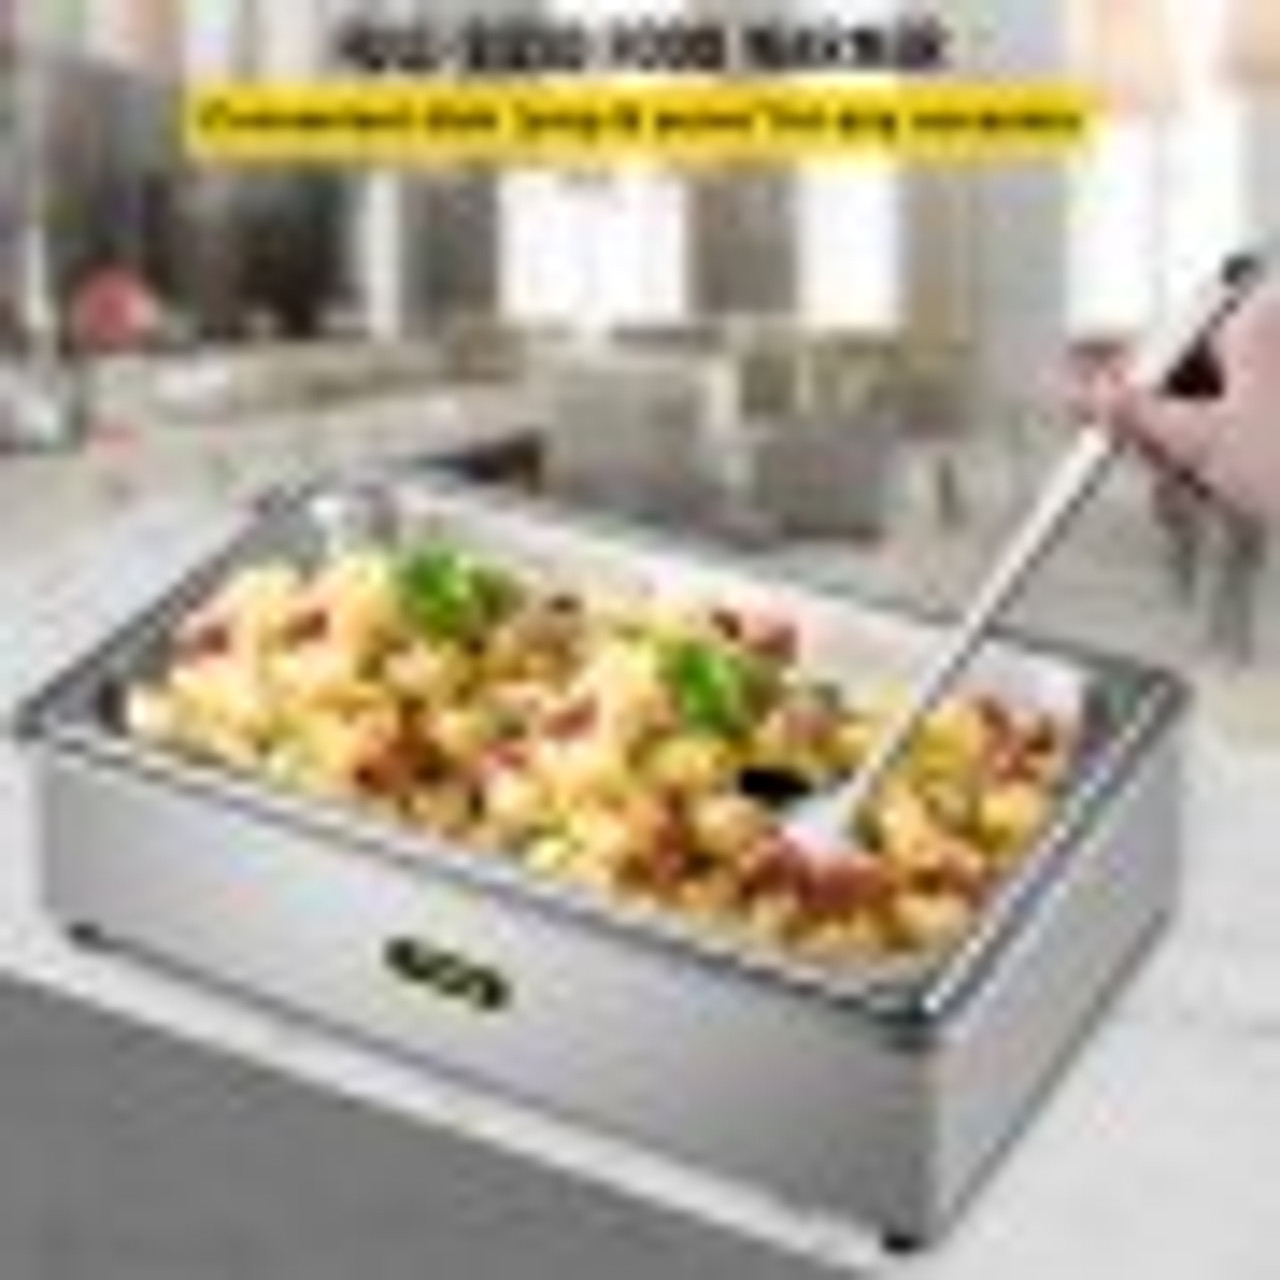 Commercial Food Warmer, Full-Size 1 Pot Steam Table with Lid, 9.5 Quart  Electric Soup Warmers